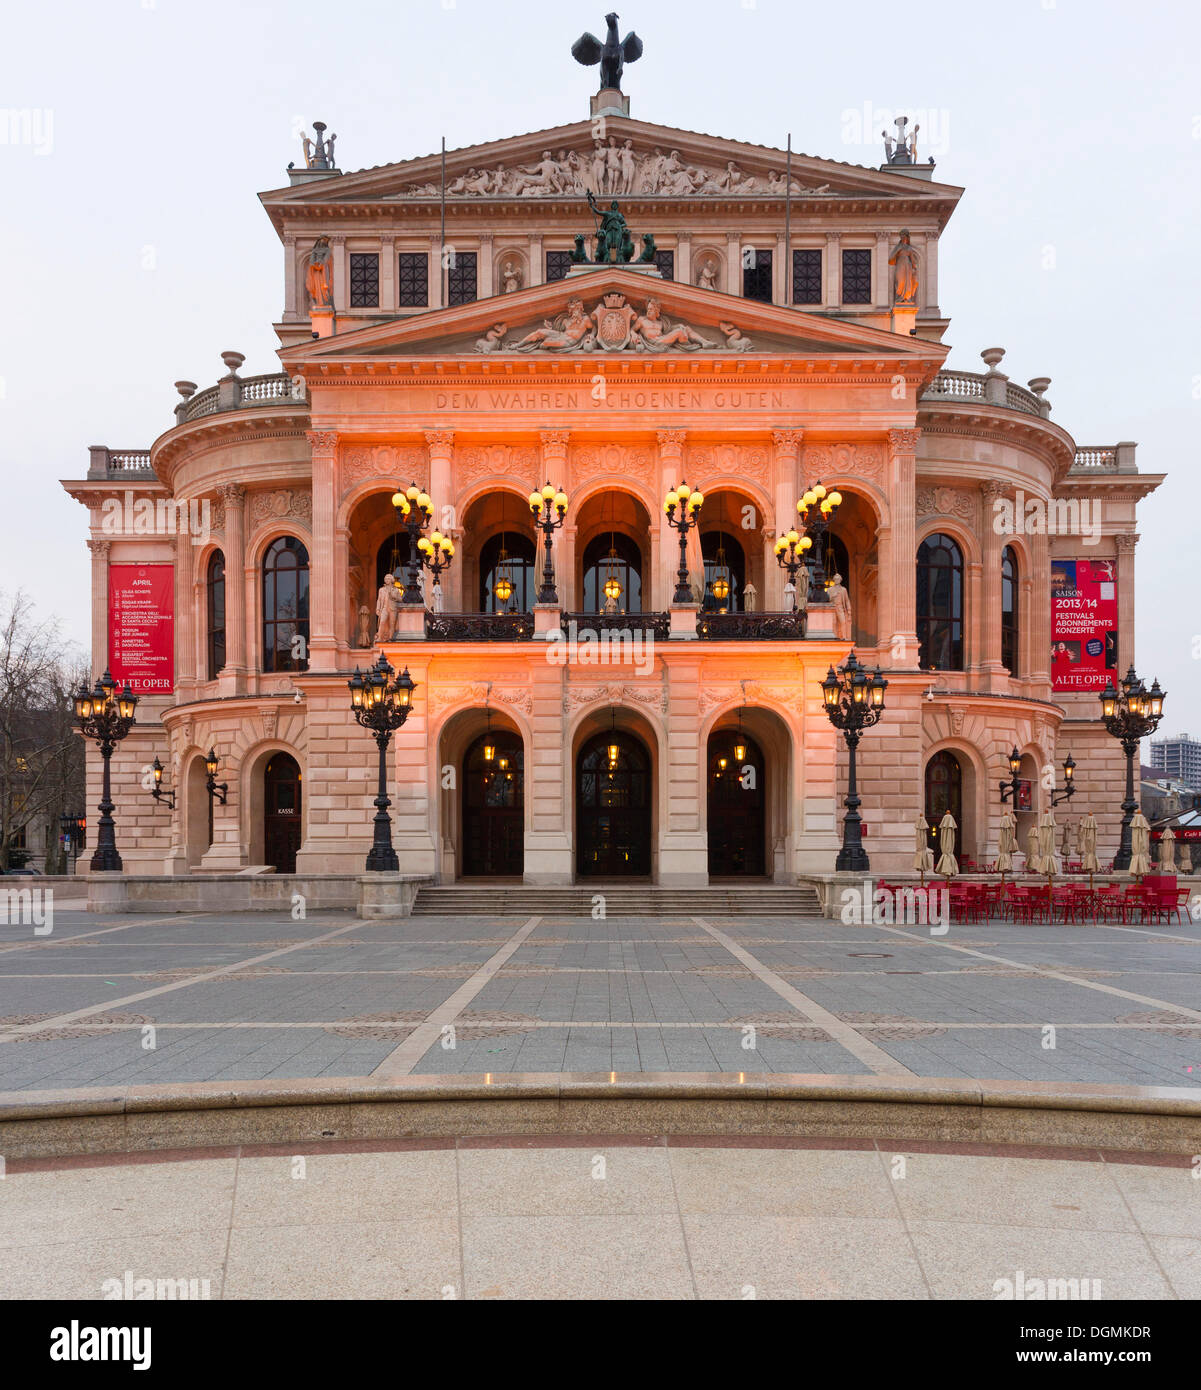 Classical building, Alte Oper, Old Opera House, designed by Richard Lucae, today a concert hall, Frankfurt am Main, Hesse Stock Photo